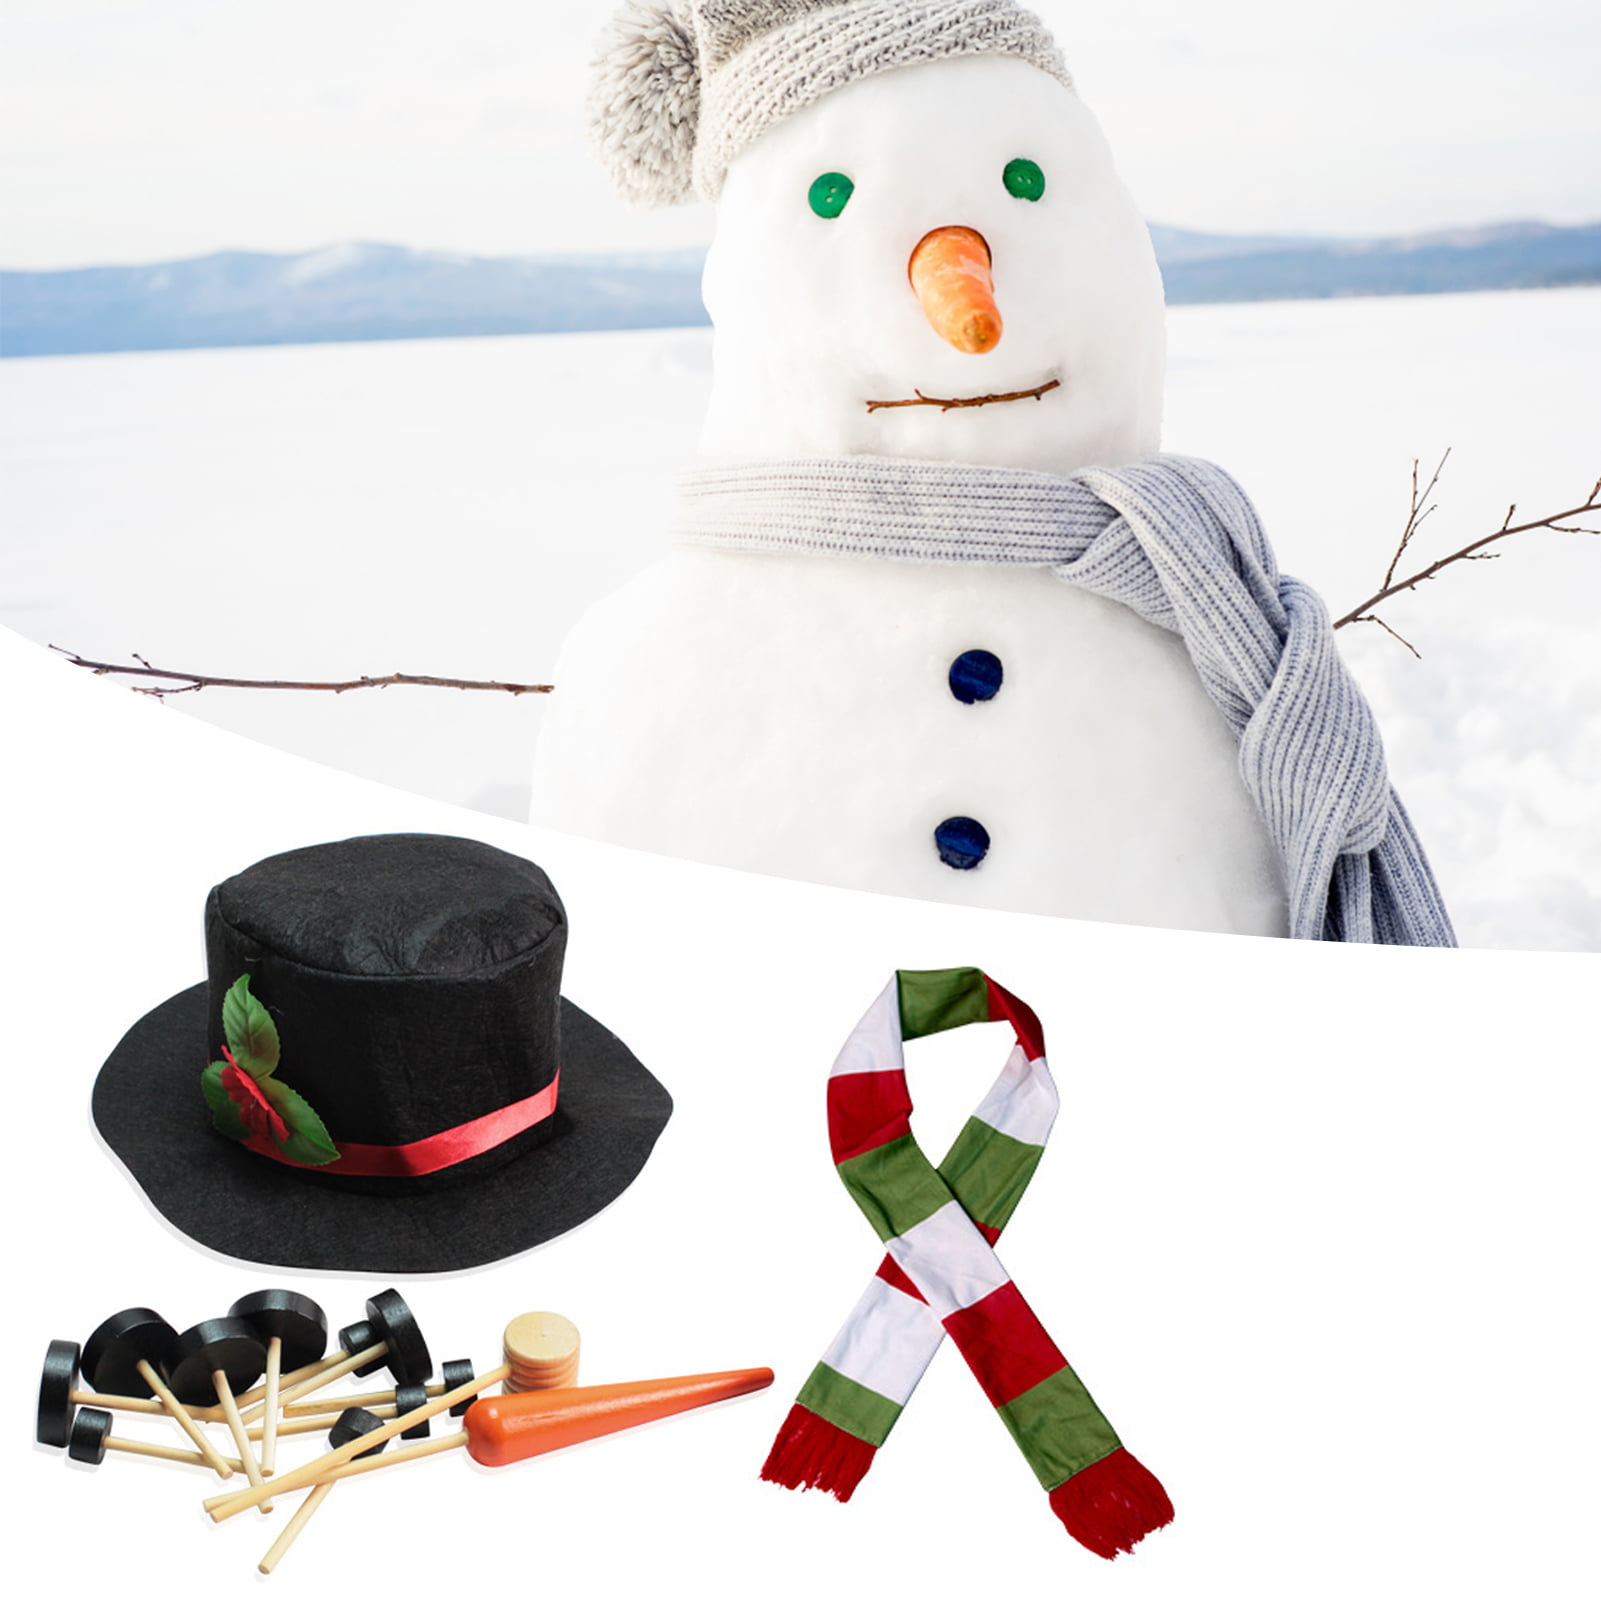  Colovis 16Pcs Snowman Decorating Kit, Snowman Making Kit Winter  Party Kids Toys Christmas Holiday Decoration Gift(1 Pack) : Toys & Games